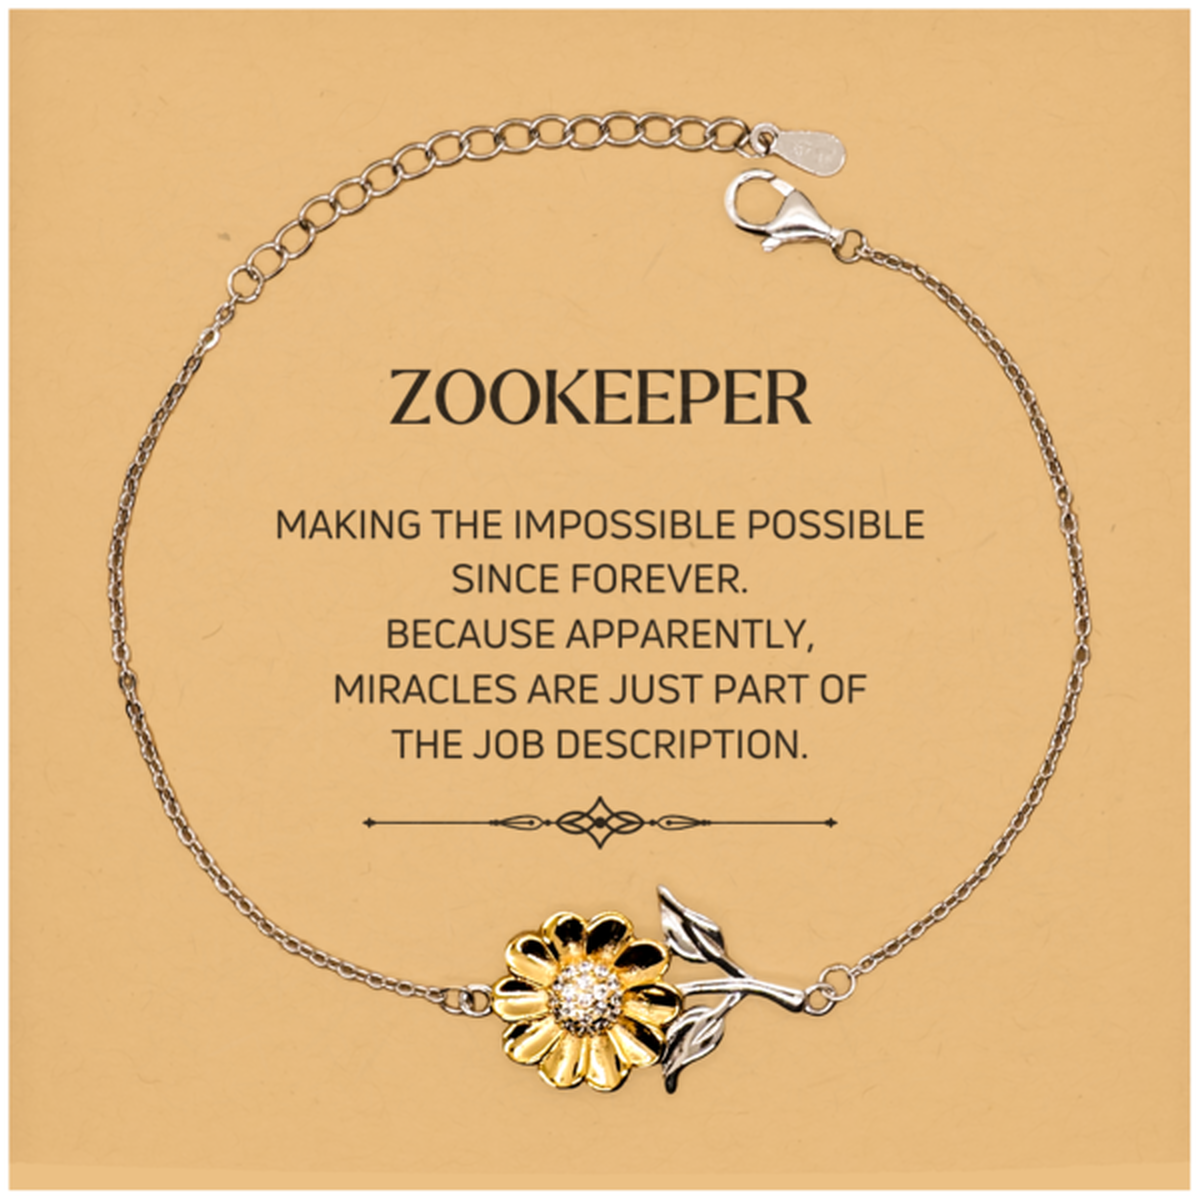 Funny Zookeeper Gifts, Miracles are just part of the job description, Inspirational Birthday Christmas Sunflower Bracelet For Zookeeper, Men, Women, Coworkers, Friends, Boss